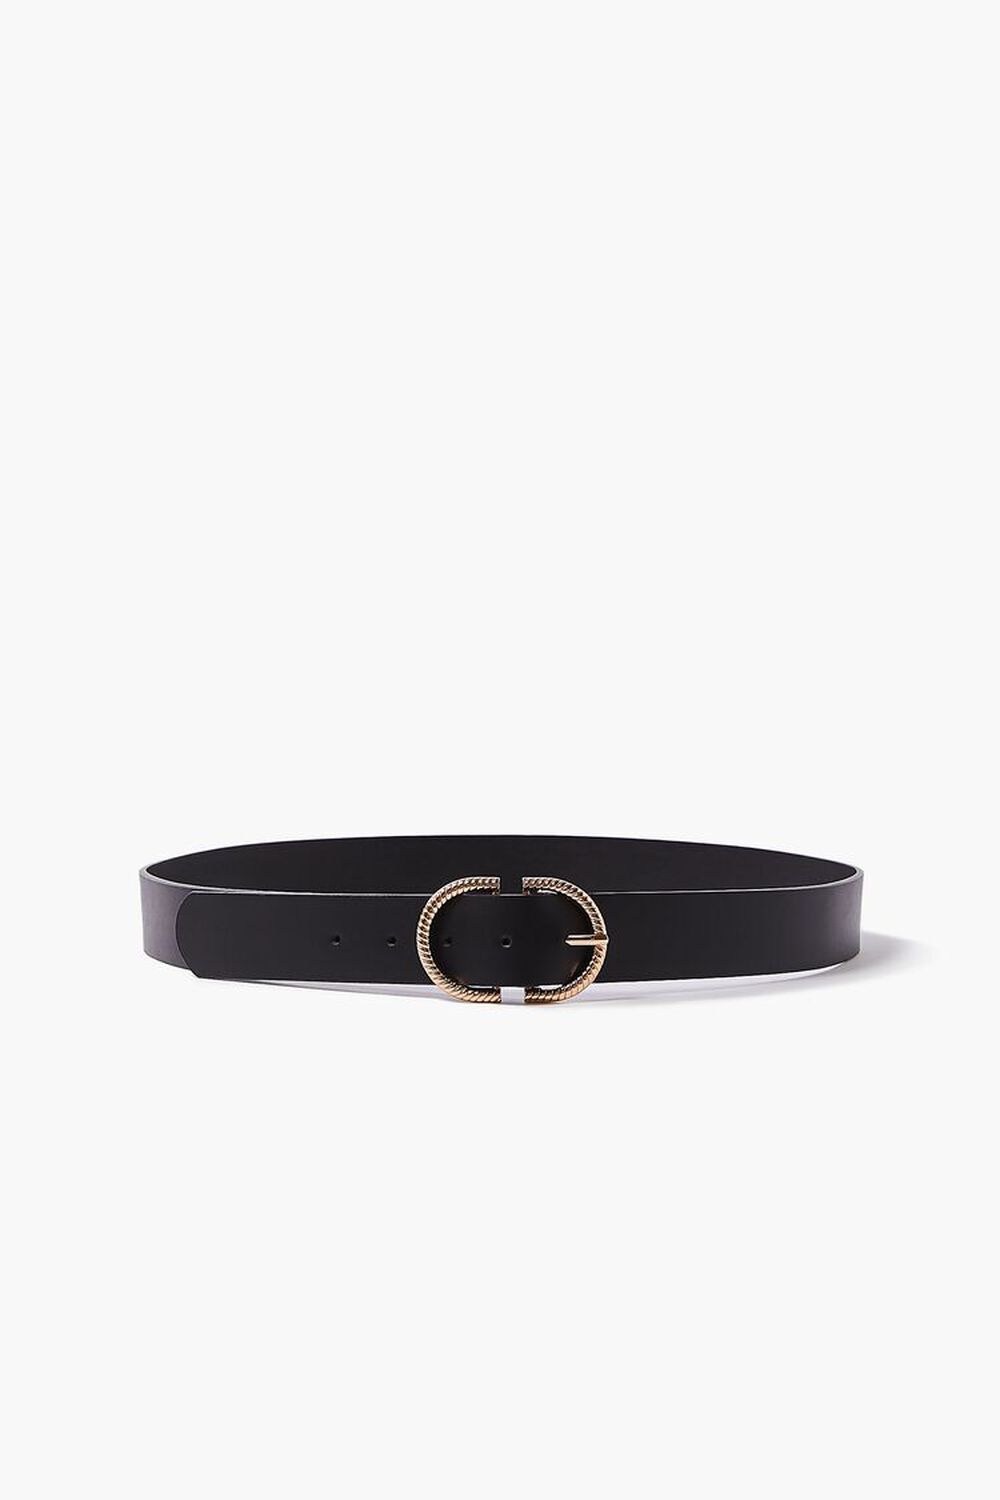 BLACK/GOLD Twisted D-Ring Faux Leather Belt, image 1